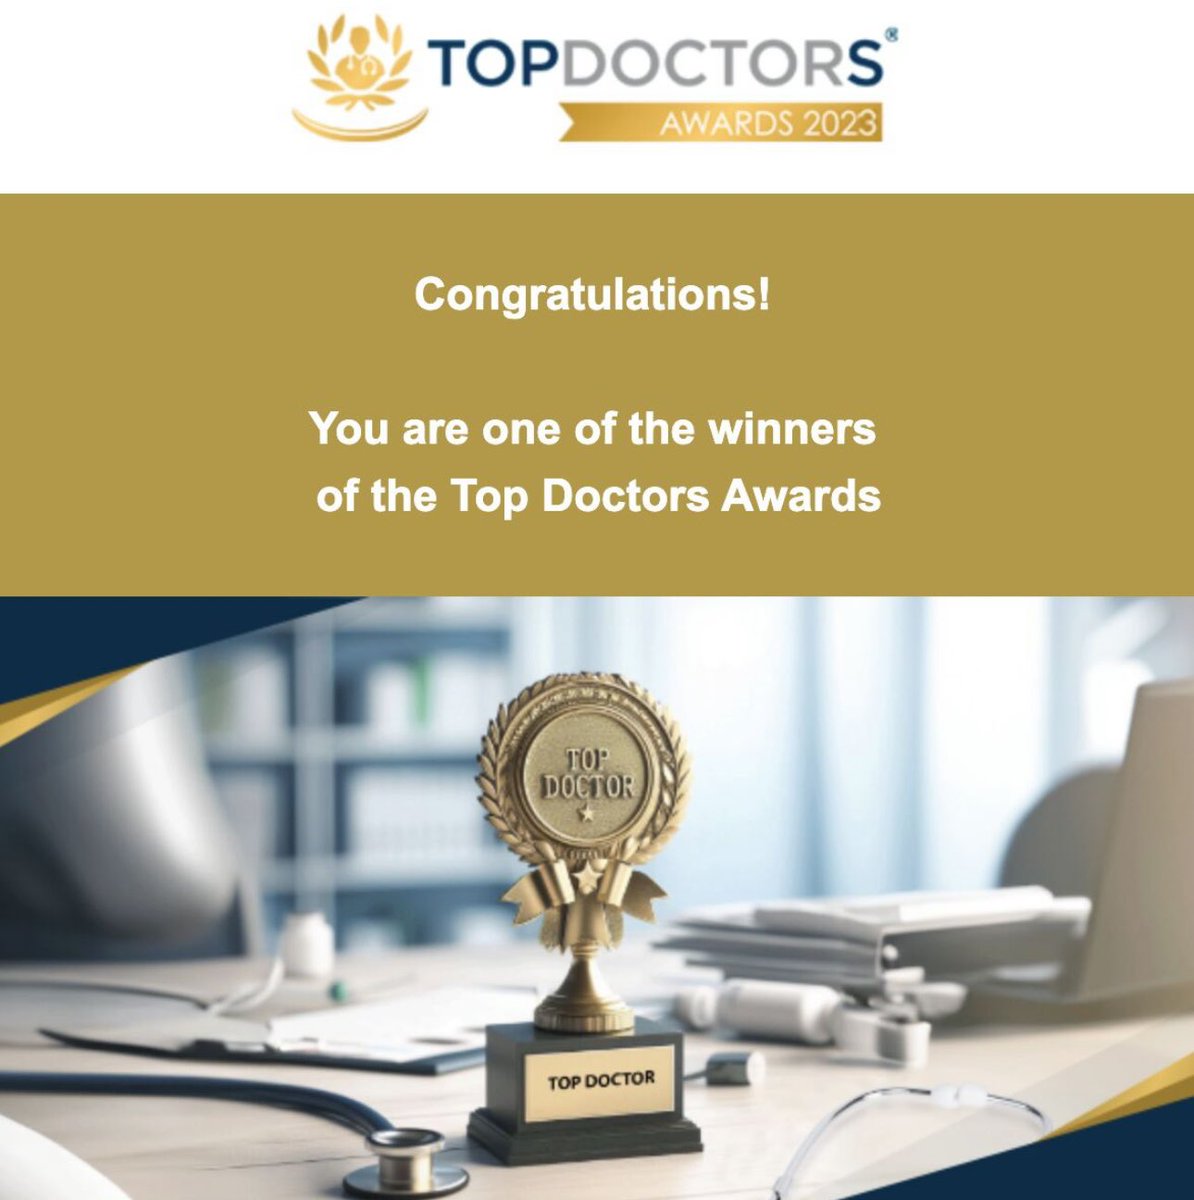 We are delighted to congratulate Eye Correction Centre East Medical Director and Consultant Ophthalmologist, Mr. Sid Goel, for being one of the winners of the Top Doctors Awards 2023. 
Well Done!
#eyesurgeon #topdoctorsawards #topdoctor #eyesurgery #cataractsurgery